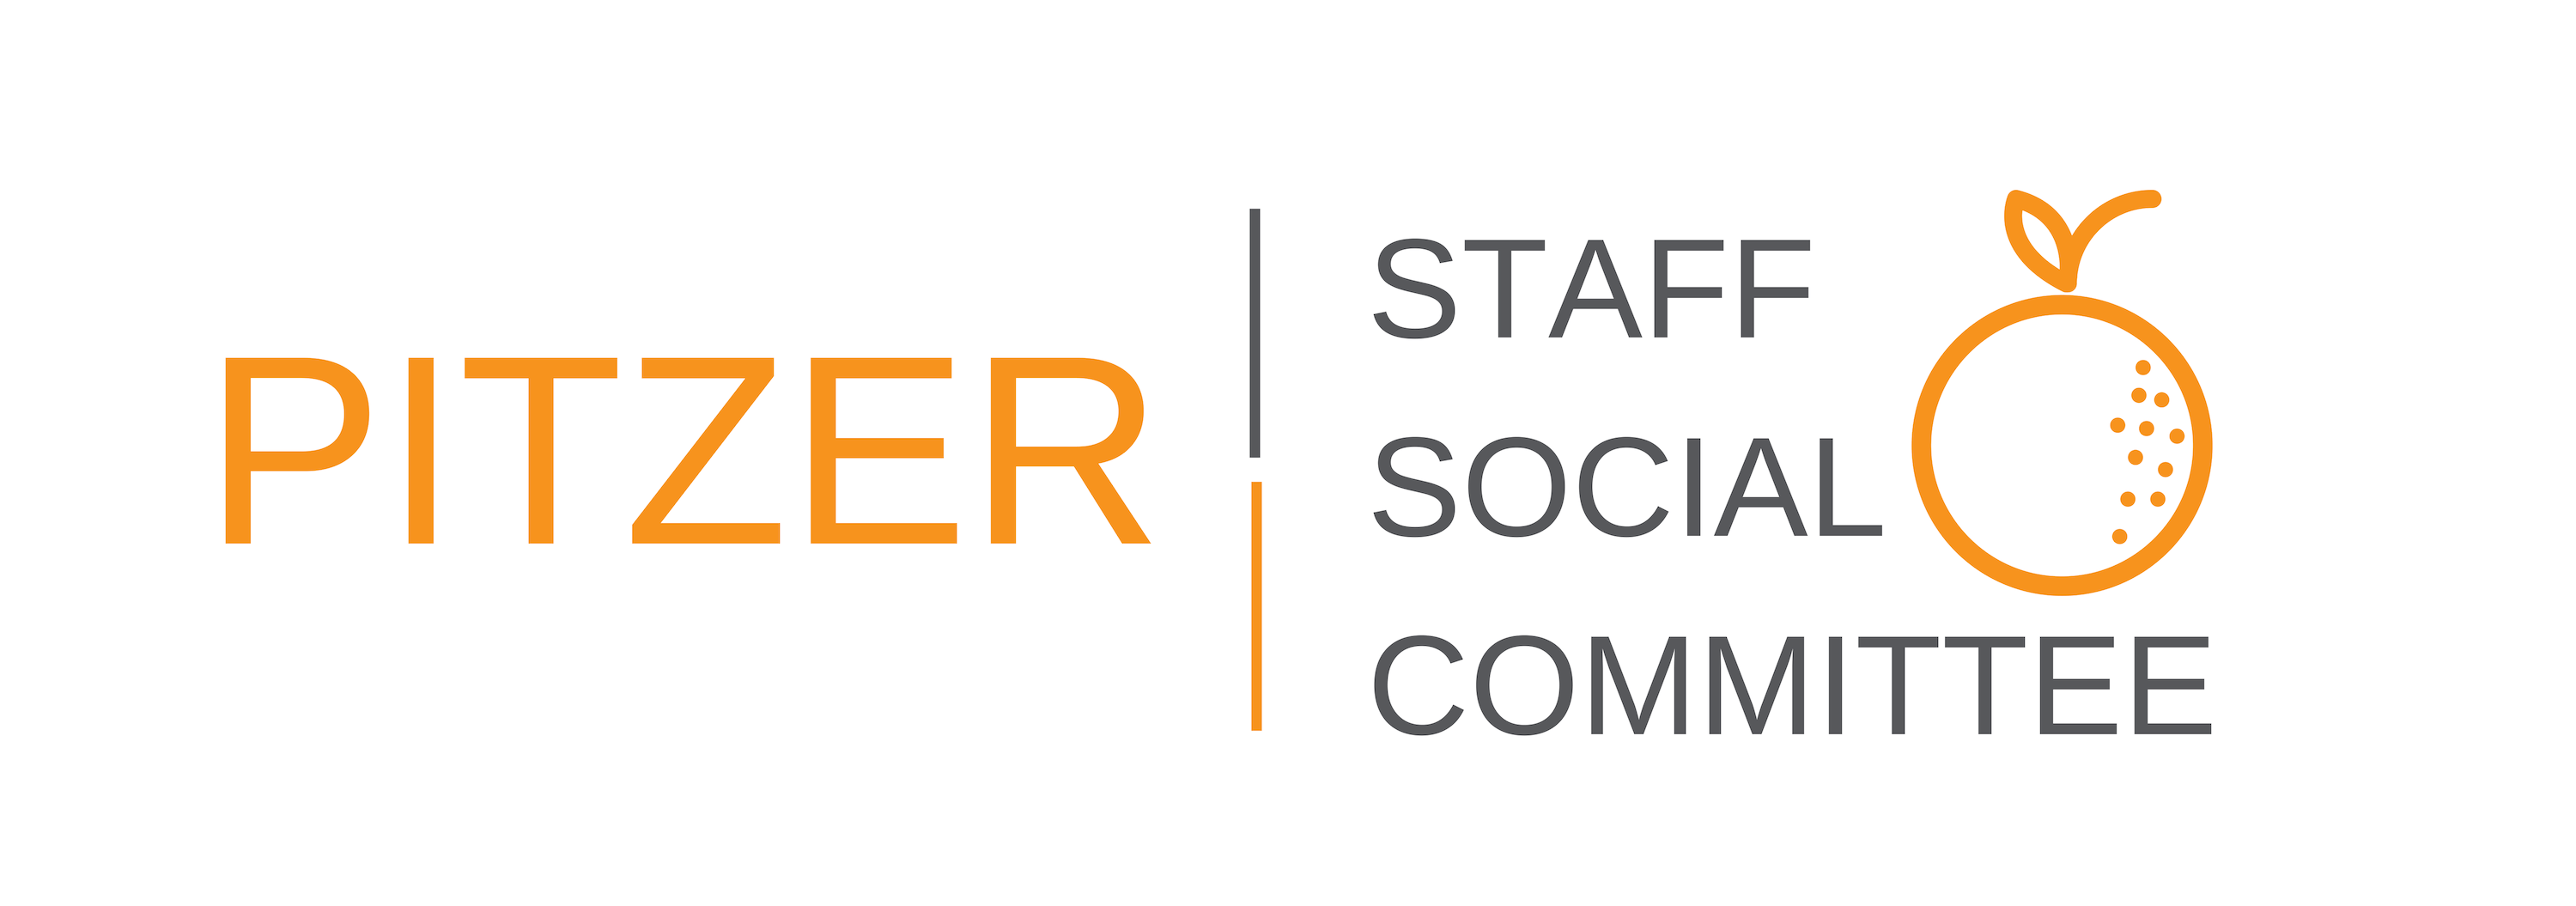 Social Committee Logo - Pitzer Staff Social Committee - Staff Council